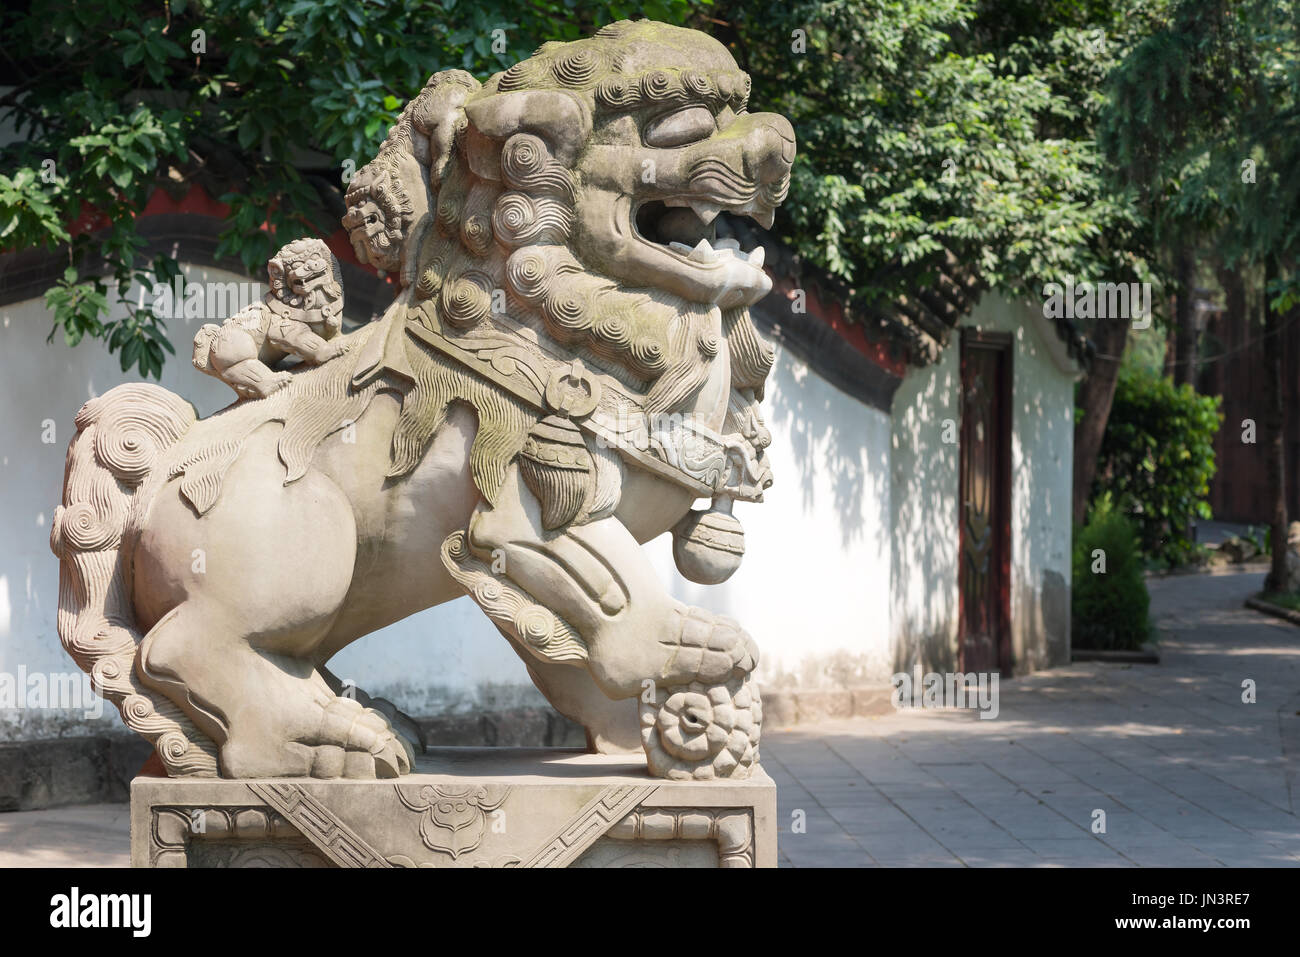 Lion stone statue with two small lions on the back in a park, Chengdu, Sichuan Province, China Stock Photo